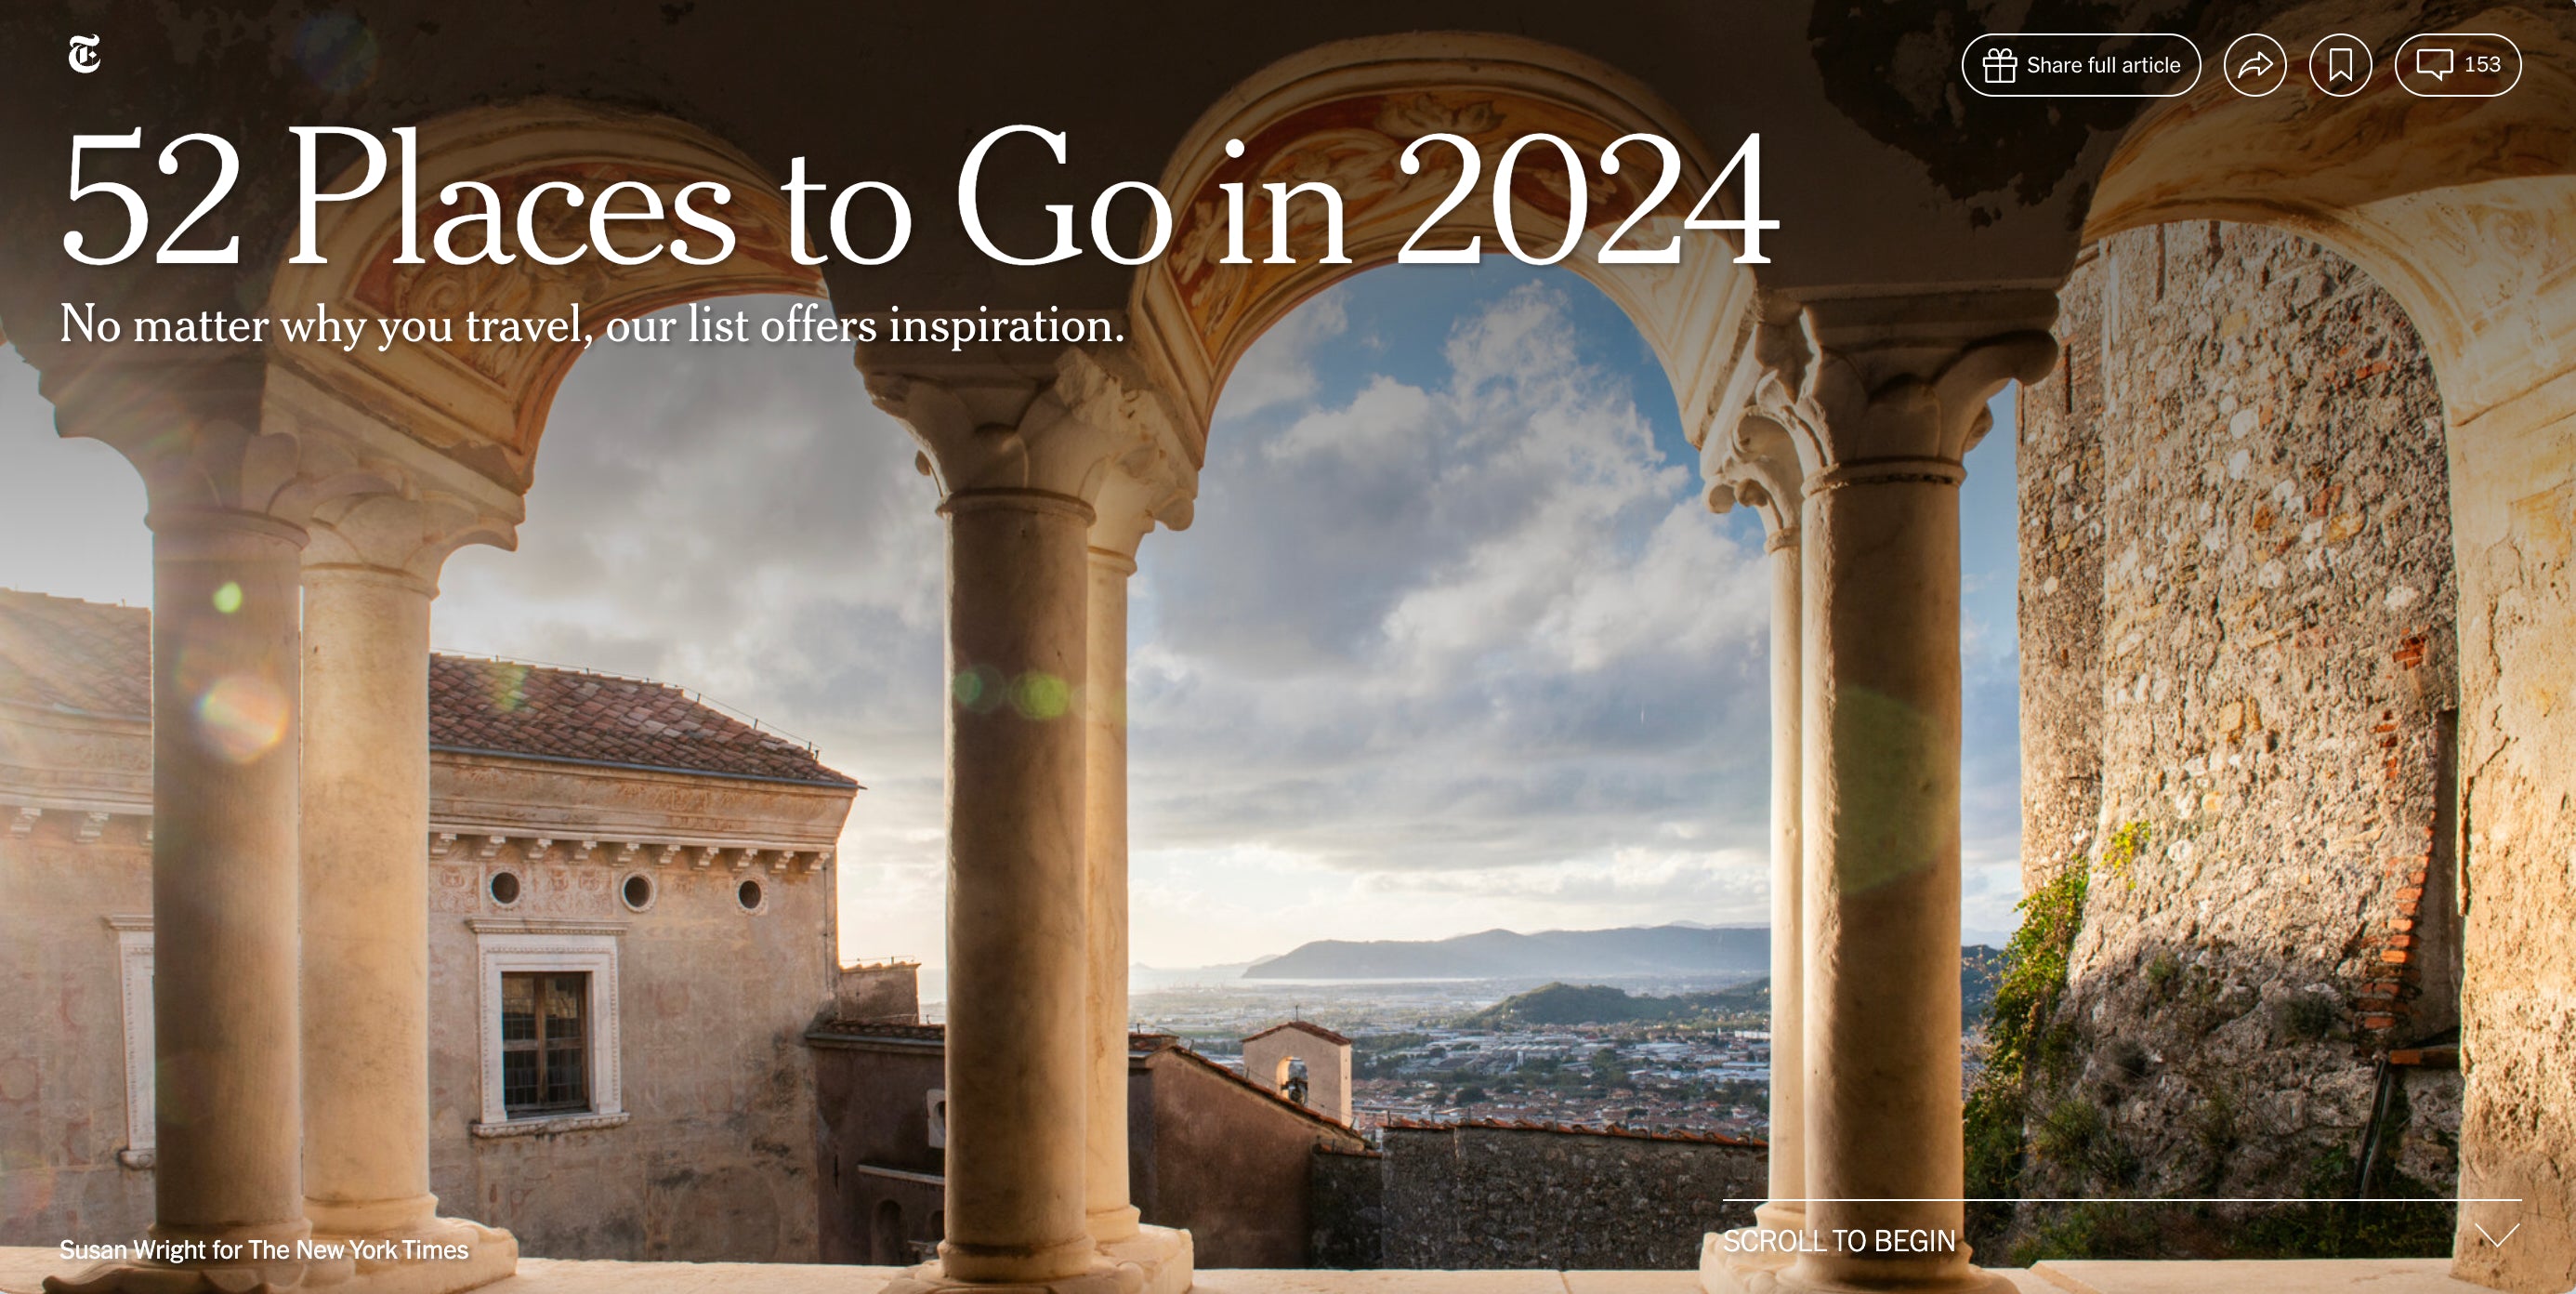 Massa-Carrara Italy for the New York Times - 52 Places to Go in 2024